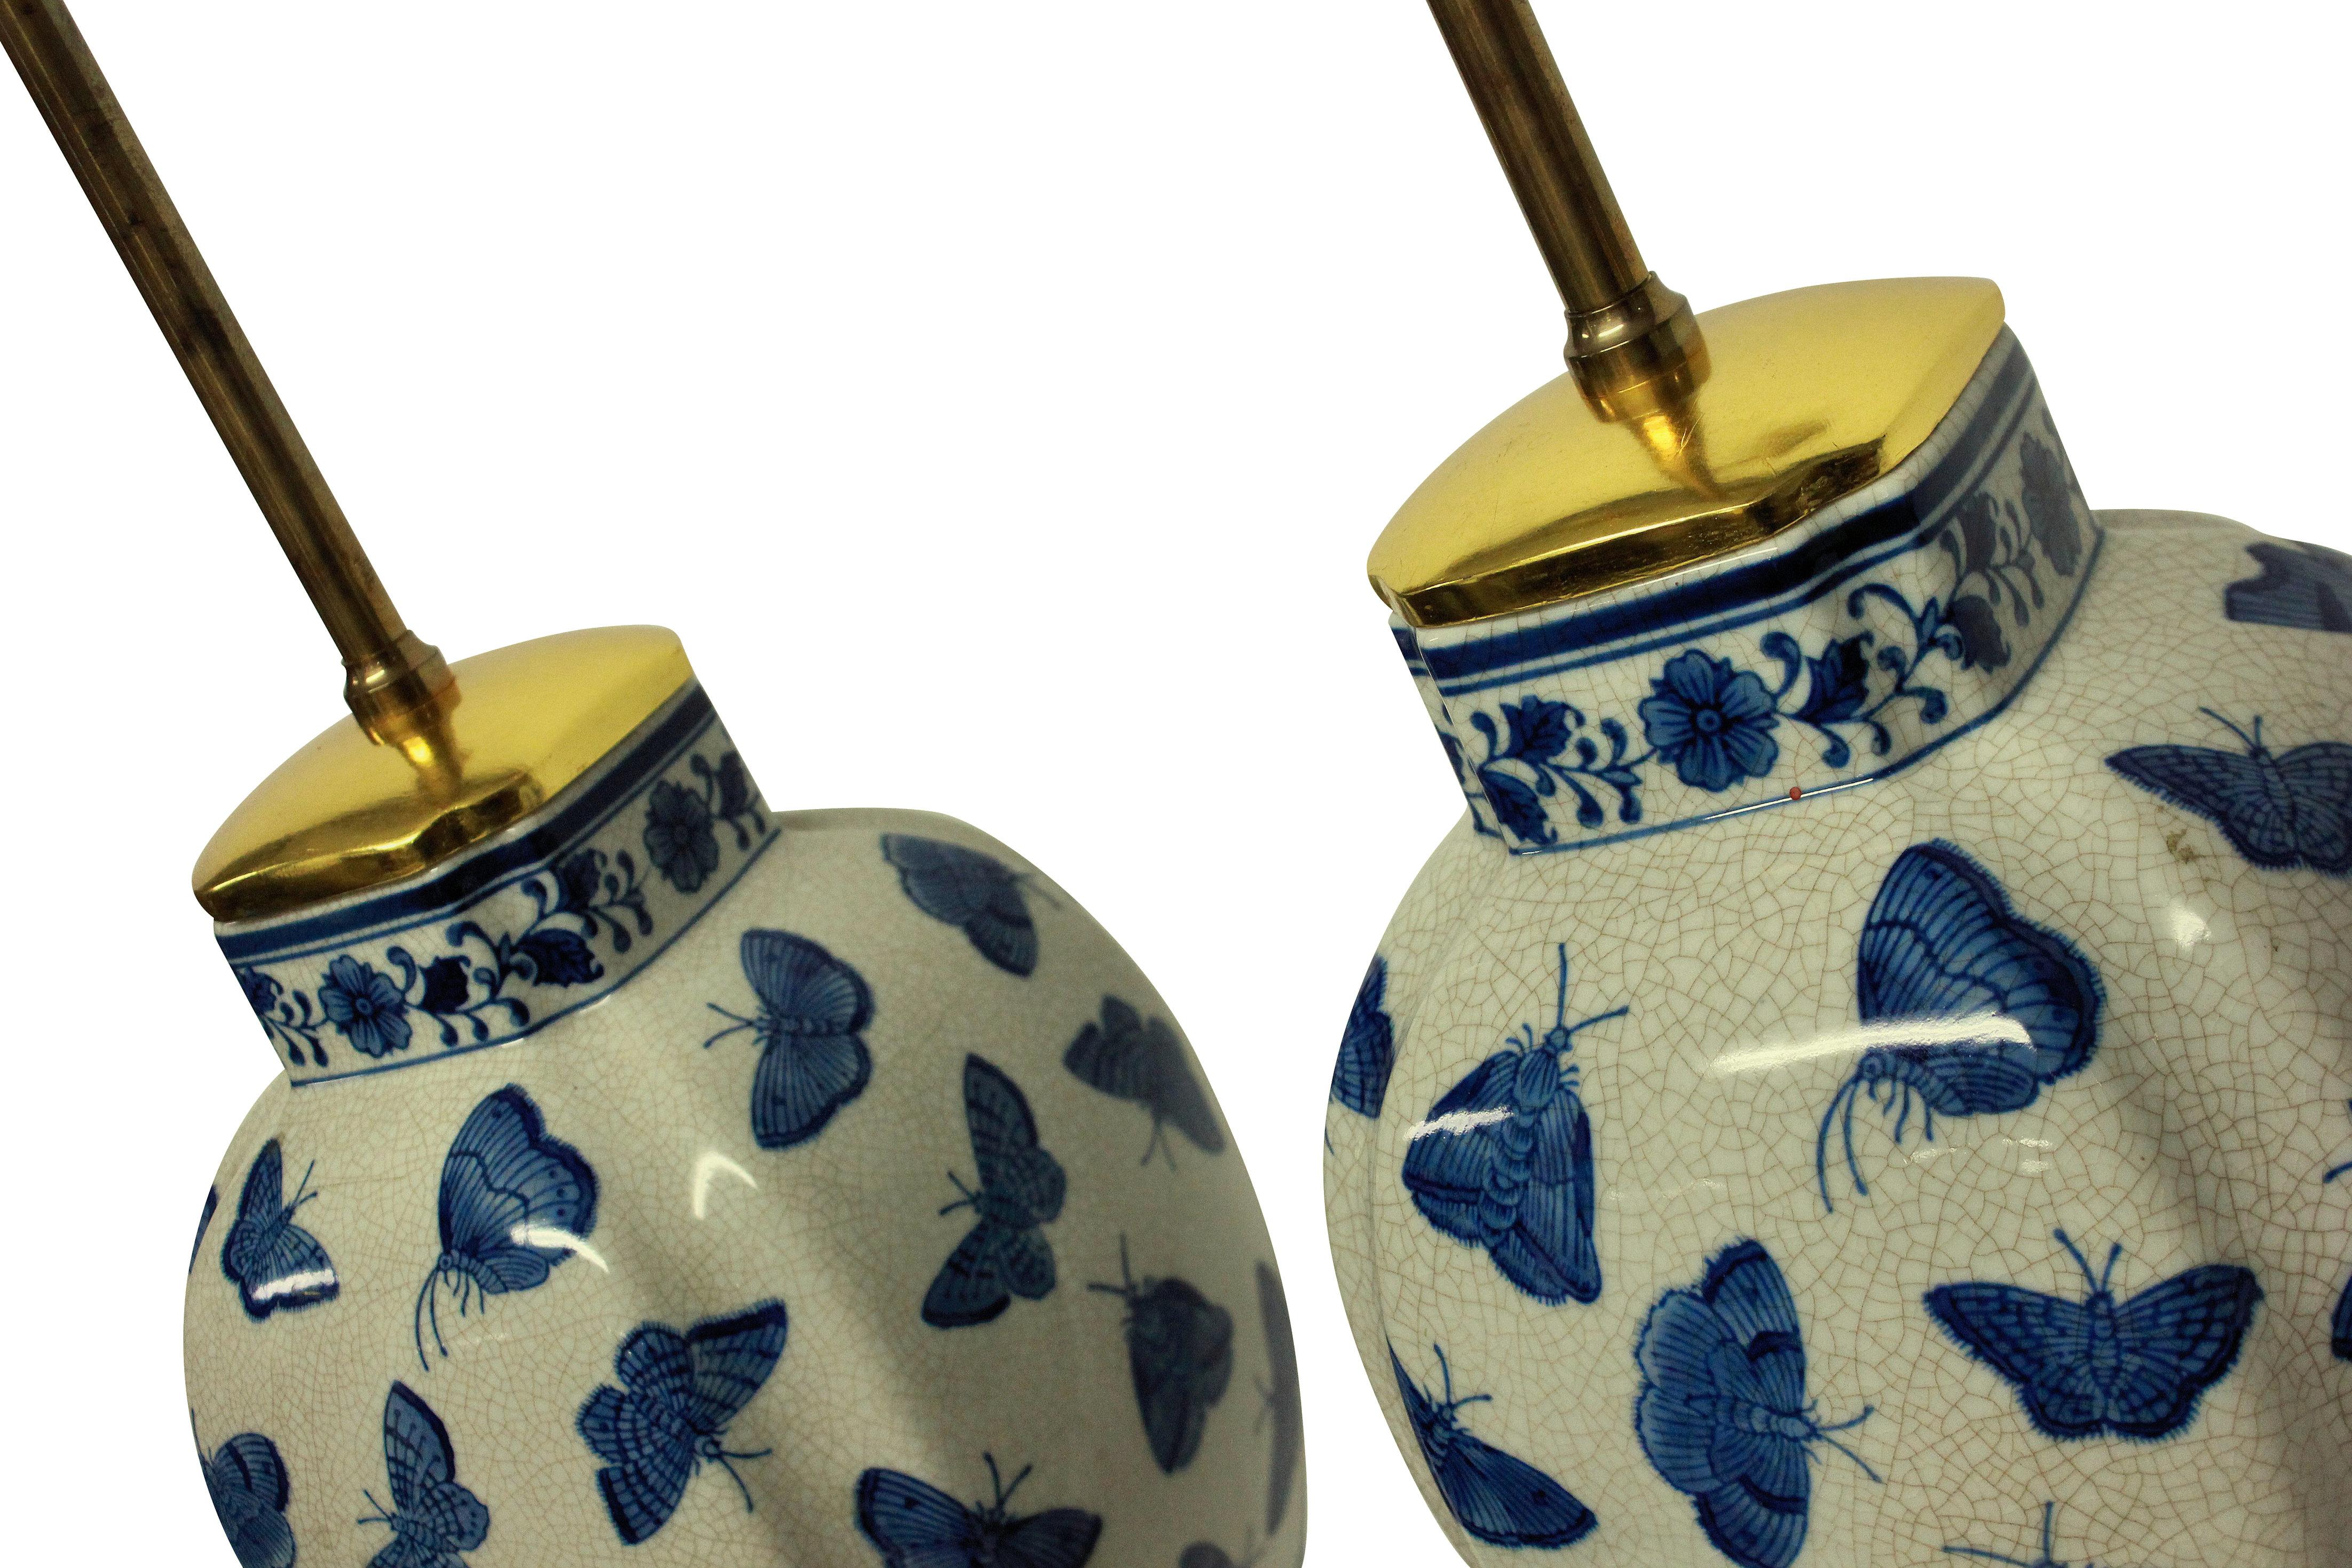 A pair of charming Chinese export blue and white porcelain vase lamps depicting butterflies. With water gilded and burnished bases and top sections. Newly electrified.